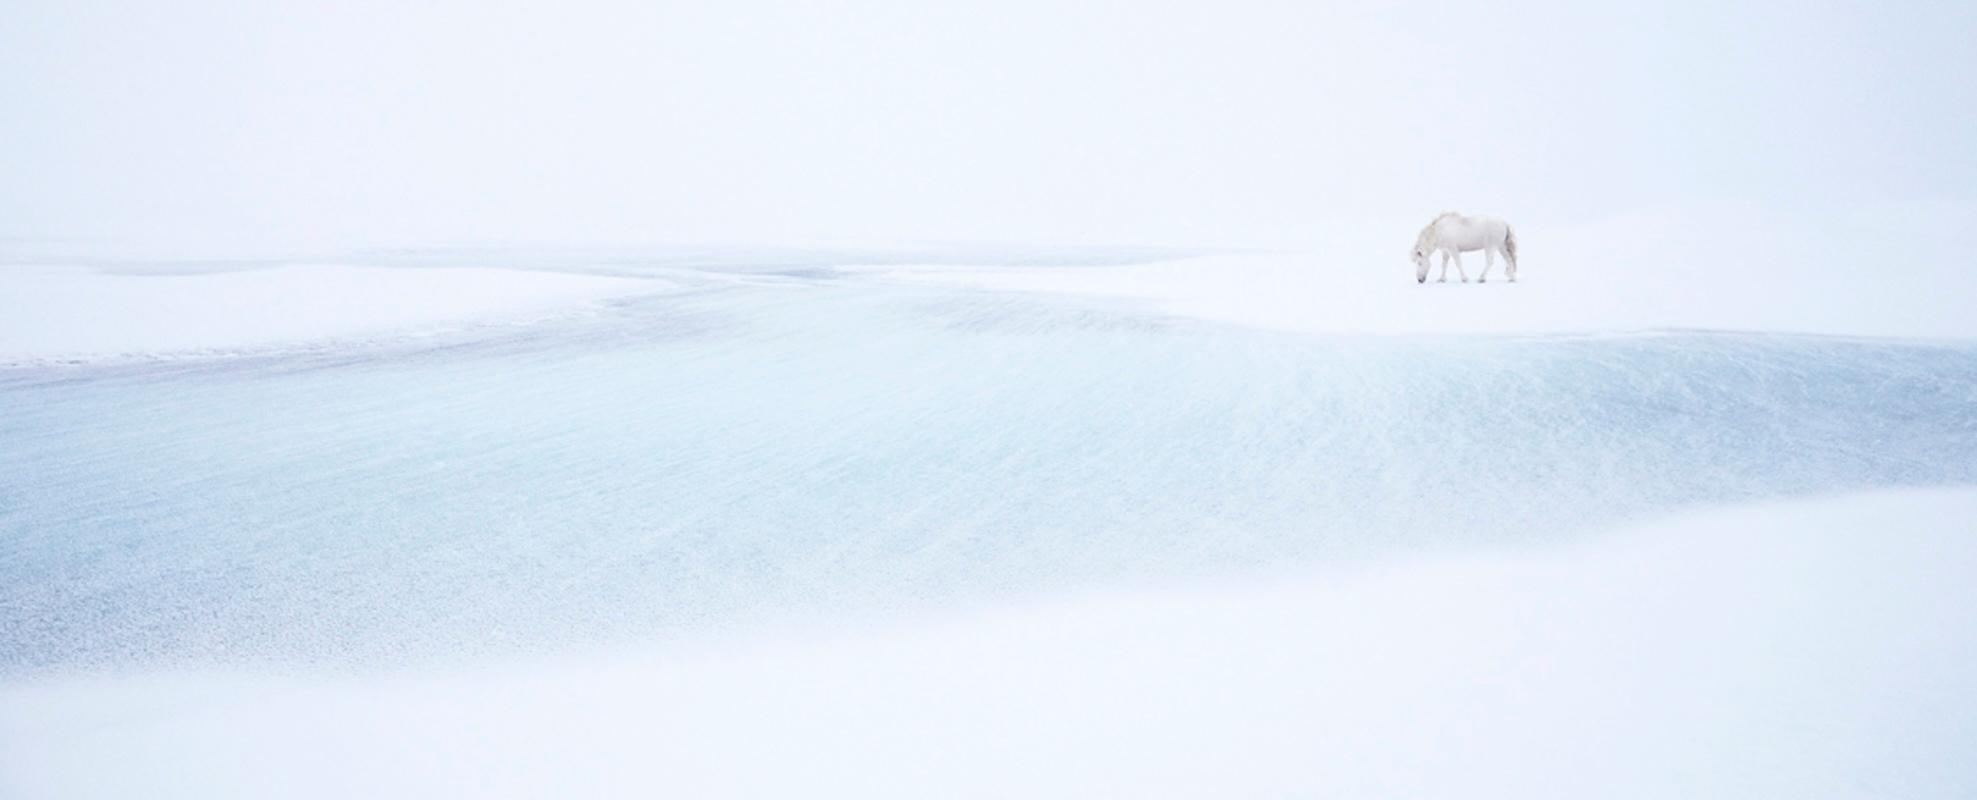 Drew Doggett Landscape Photograph - A lone white horse at ease next against the surreal frozen tundra of Iceland